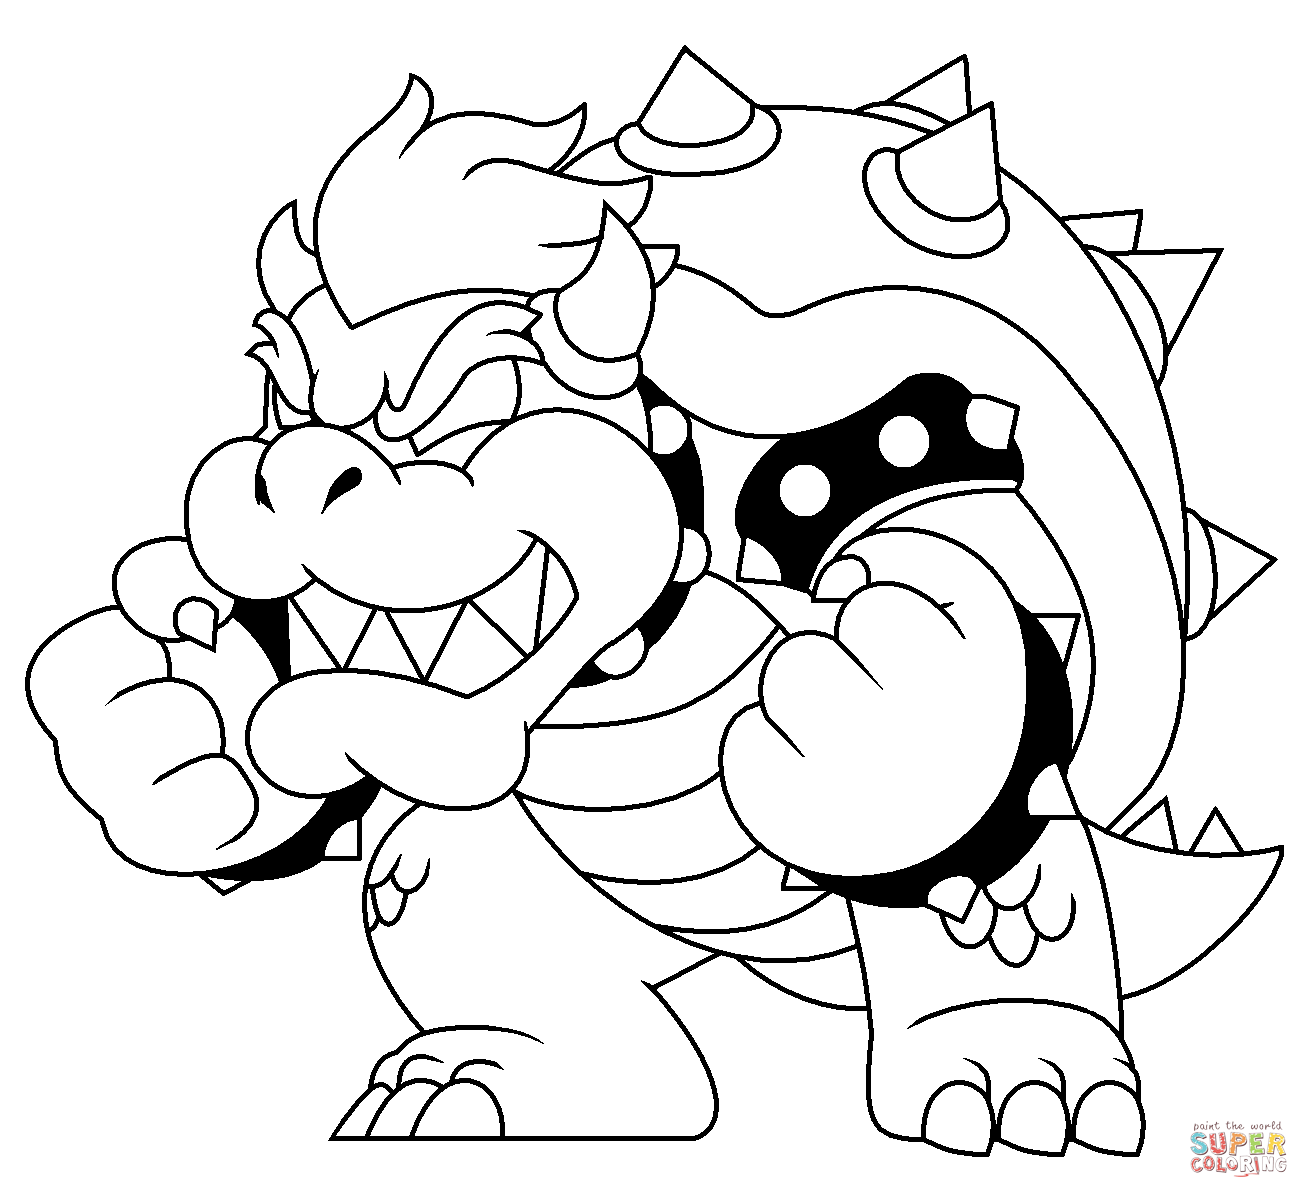 Bowser coloring page free printable coloring pages